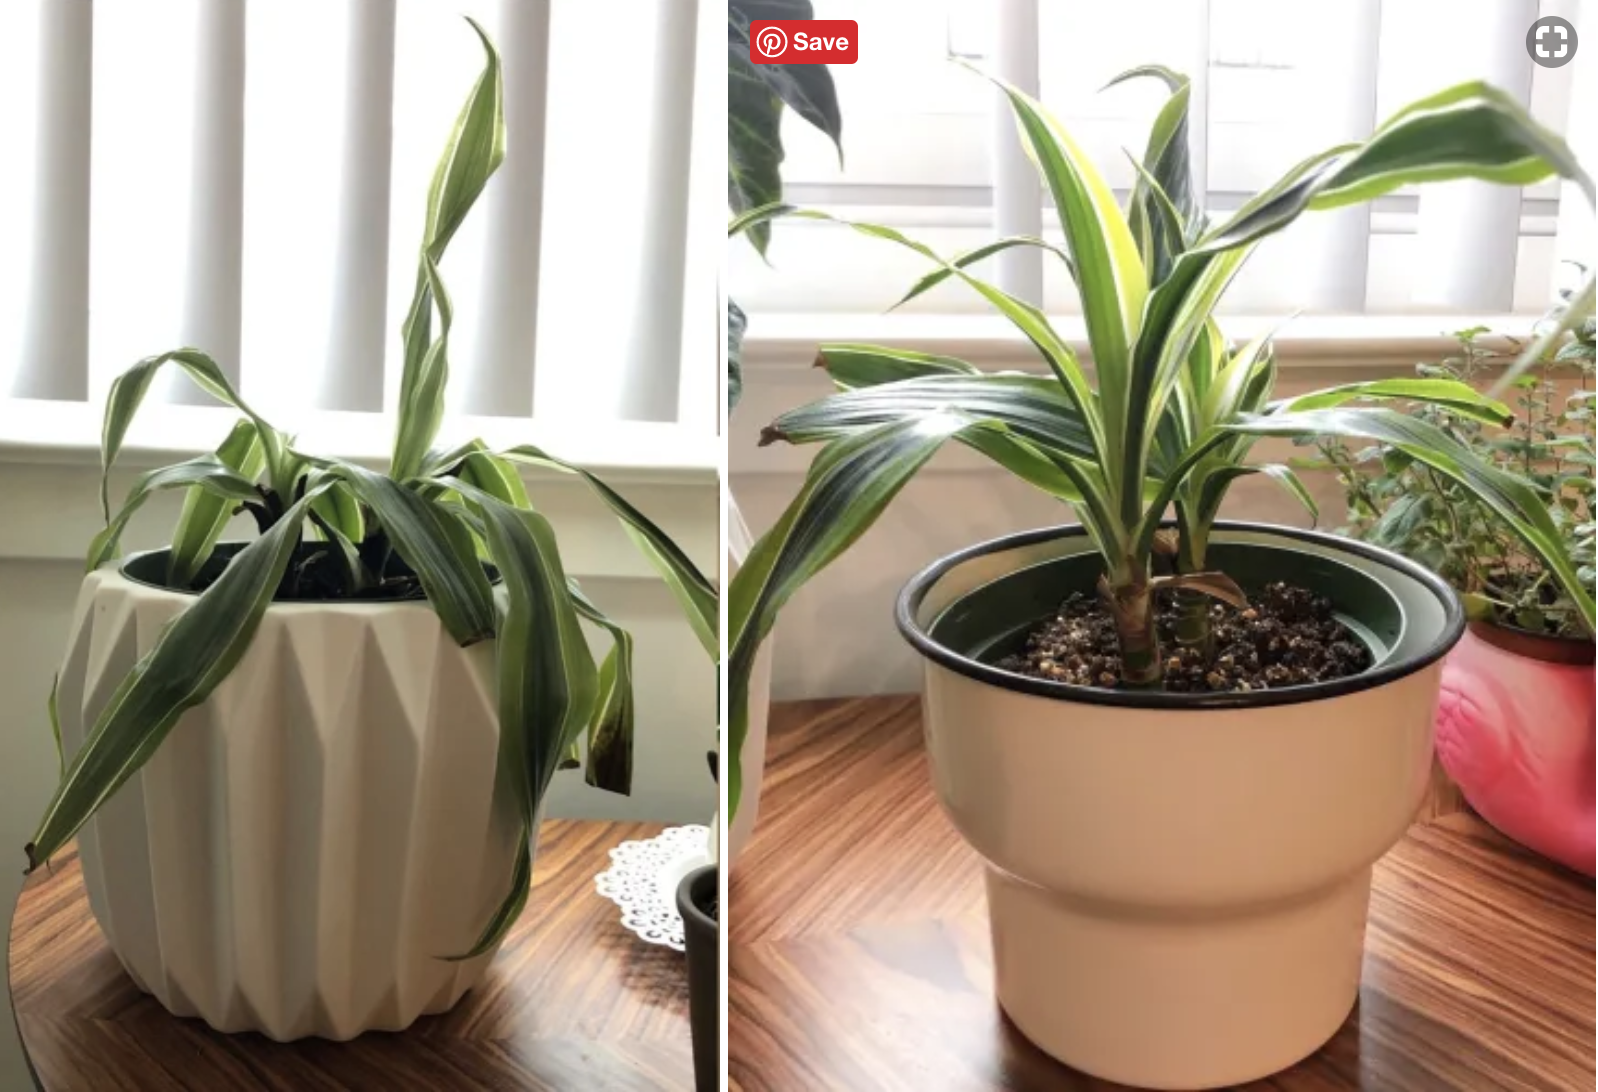 A review image of a wilted plant on the left, and the same plant but perky and full on the right